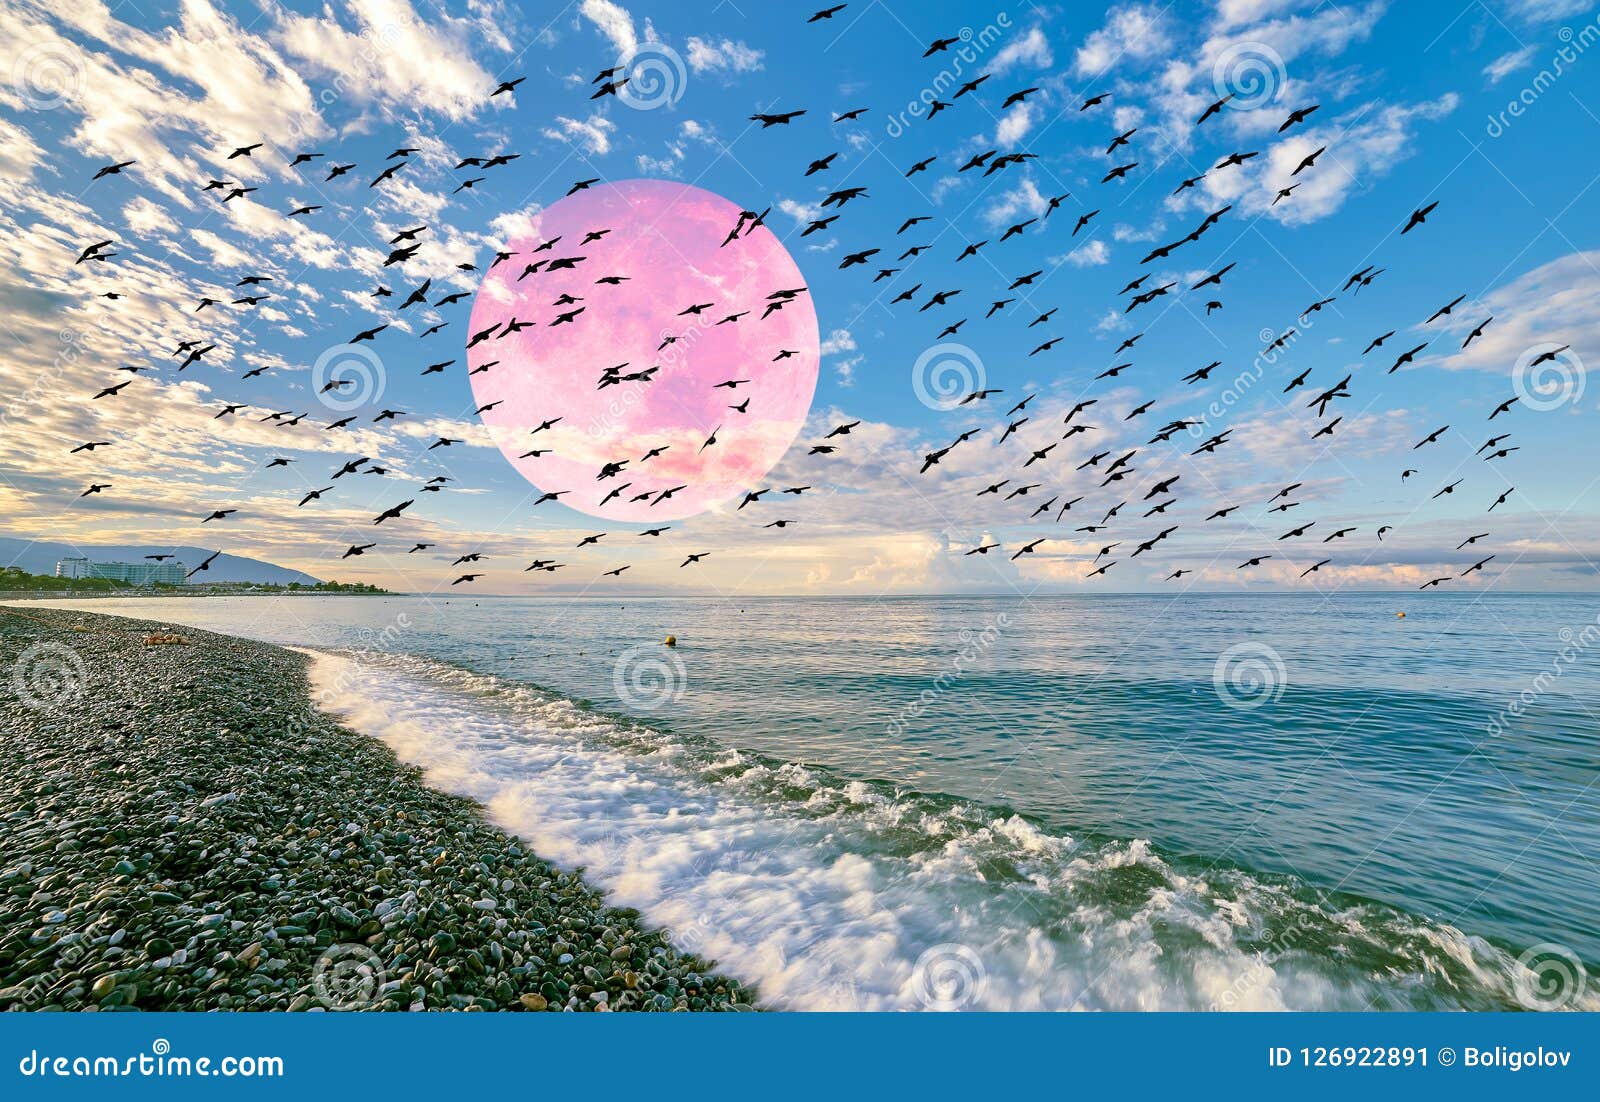 Moon Collage of Green Glowing Sunny Waves of Black Sea with Reflections of  Blue Cloudy Sky Stock Image - Image of nature, cloudy: 126922891